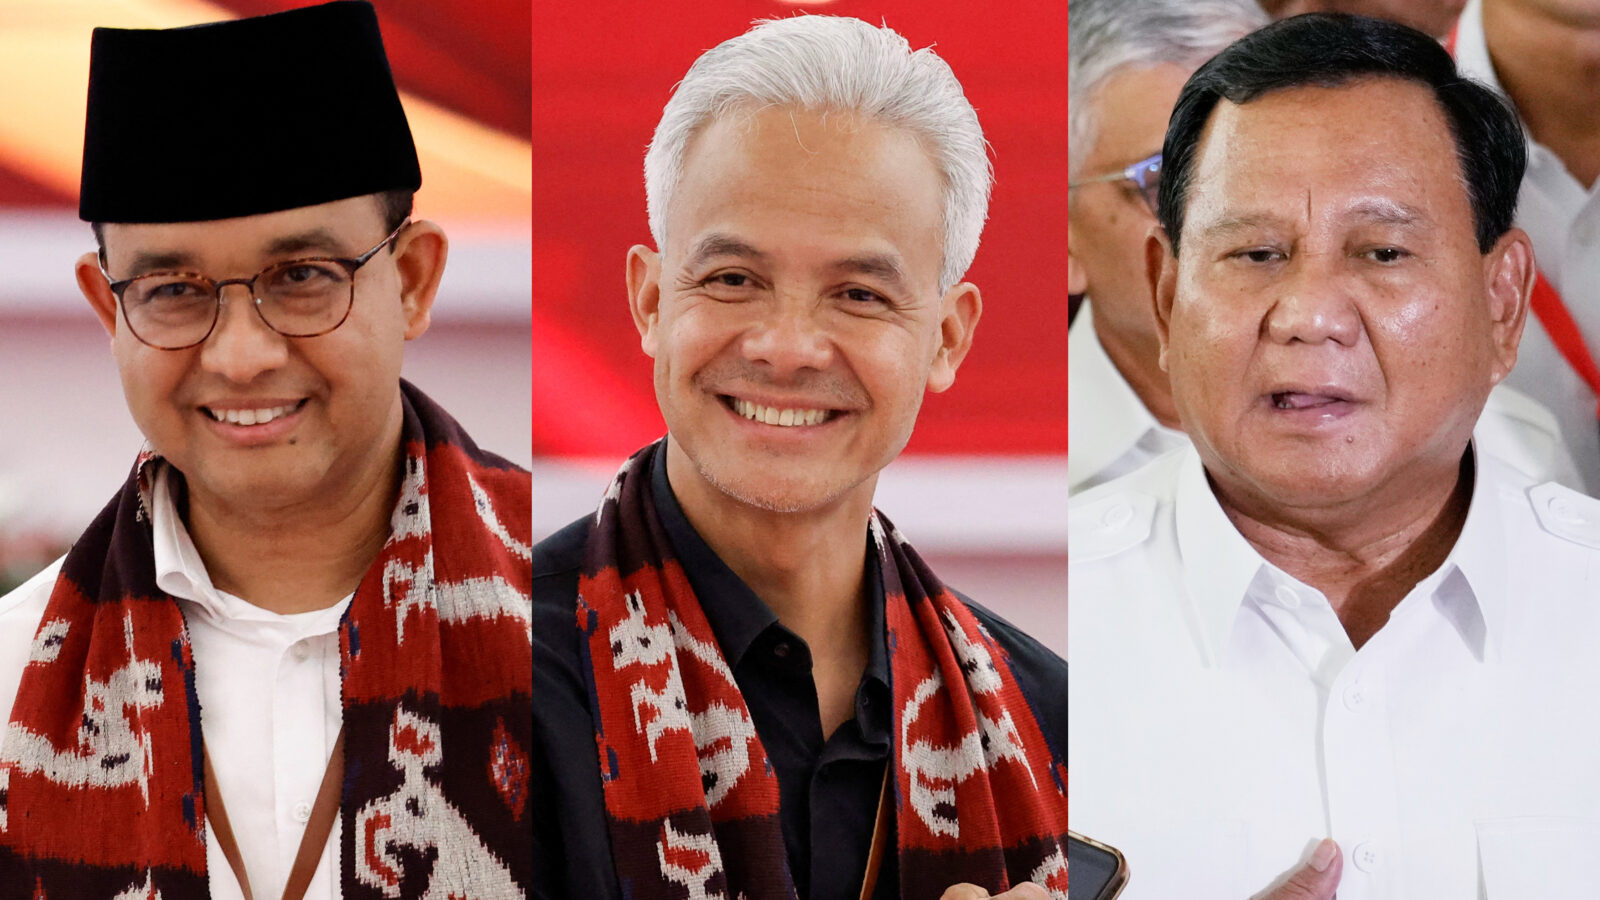 Indonesia presidential election campaign period to open. Foreign Brief